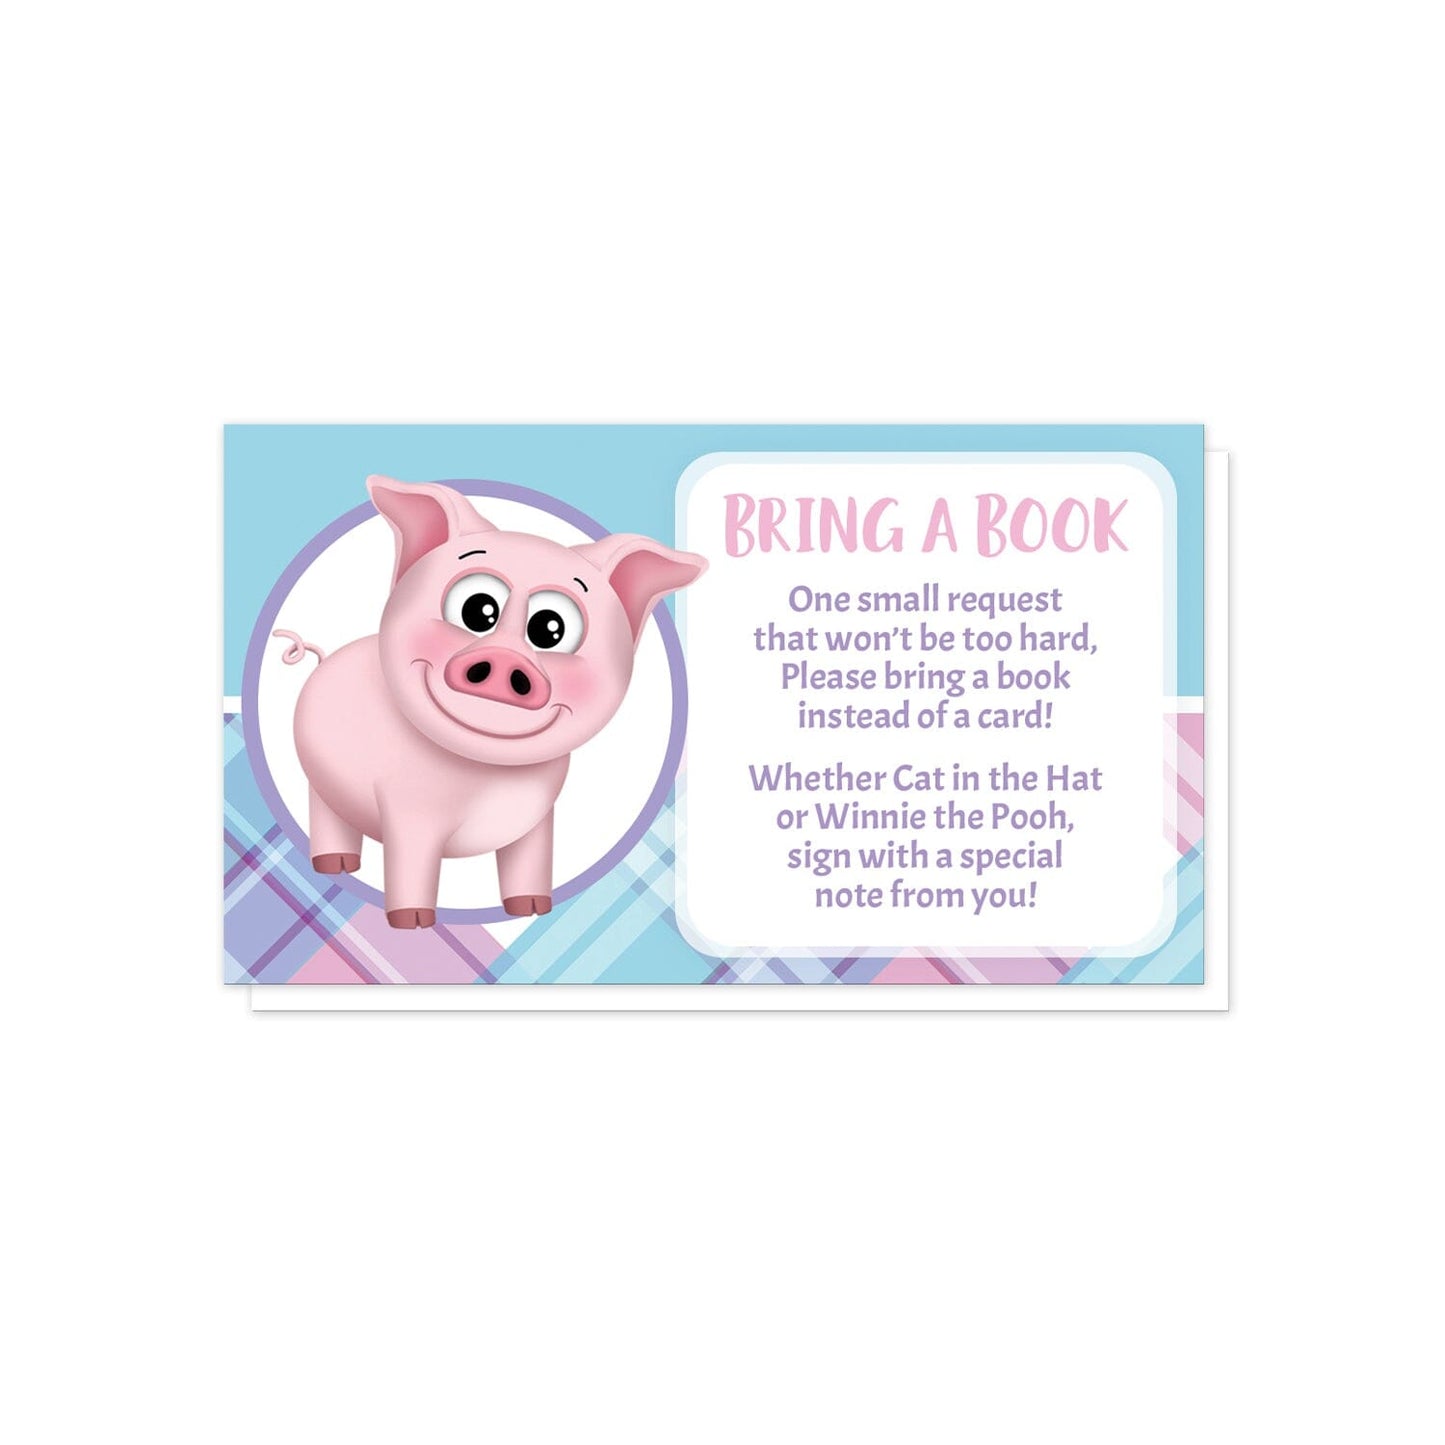 Happy Pig Pink Blue and Purple Plaid Bring a Book Cards at Artistically Invited. Adorable happy pig pink blue and purple plaid bring a book cards illustrated with a cute and happy pink pig in a white and purple circle on the left side over a blue background along the top, and a pink, blue, and purple plaid pattern background along the bottom. Your book request details are printed in pink and purple in a white rectangular area over the background design on the right side.